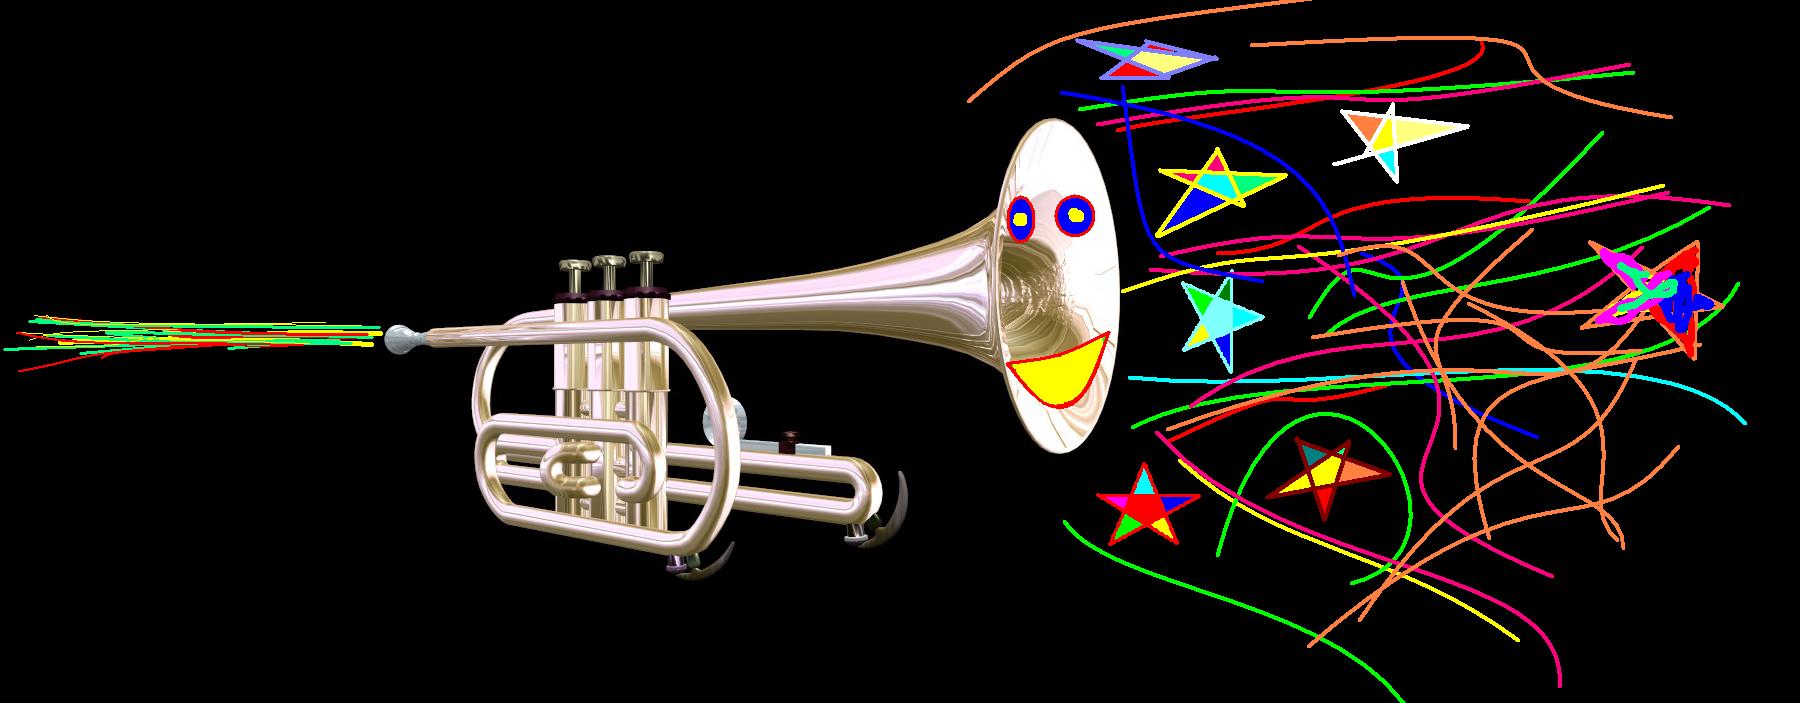 /pages/a-magical-trumpet-called-bill/gallery/3d.jpg